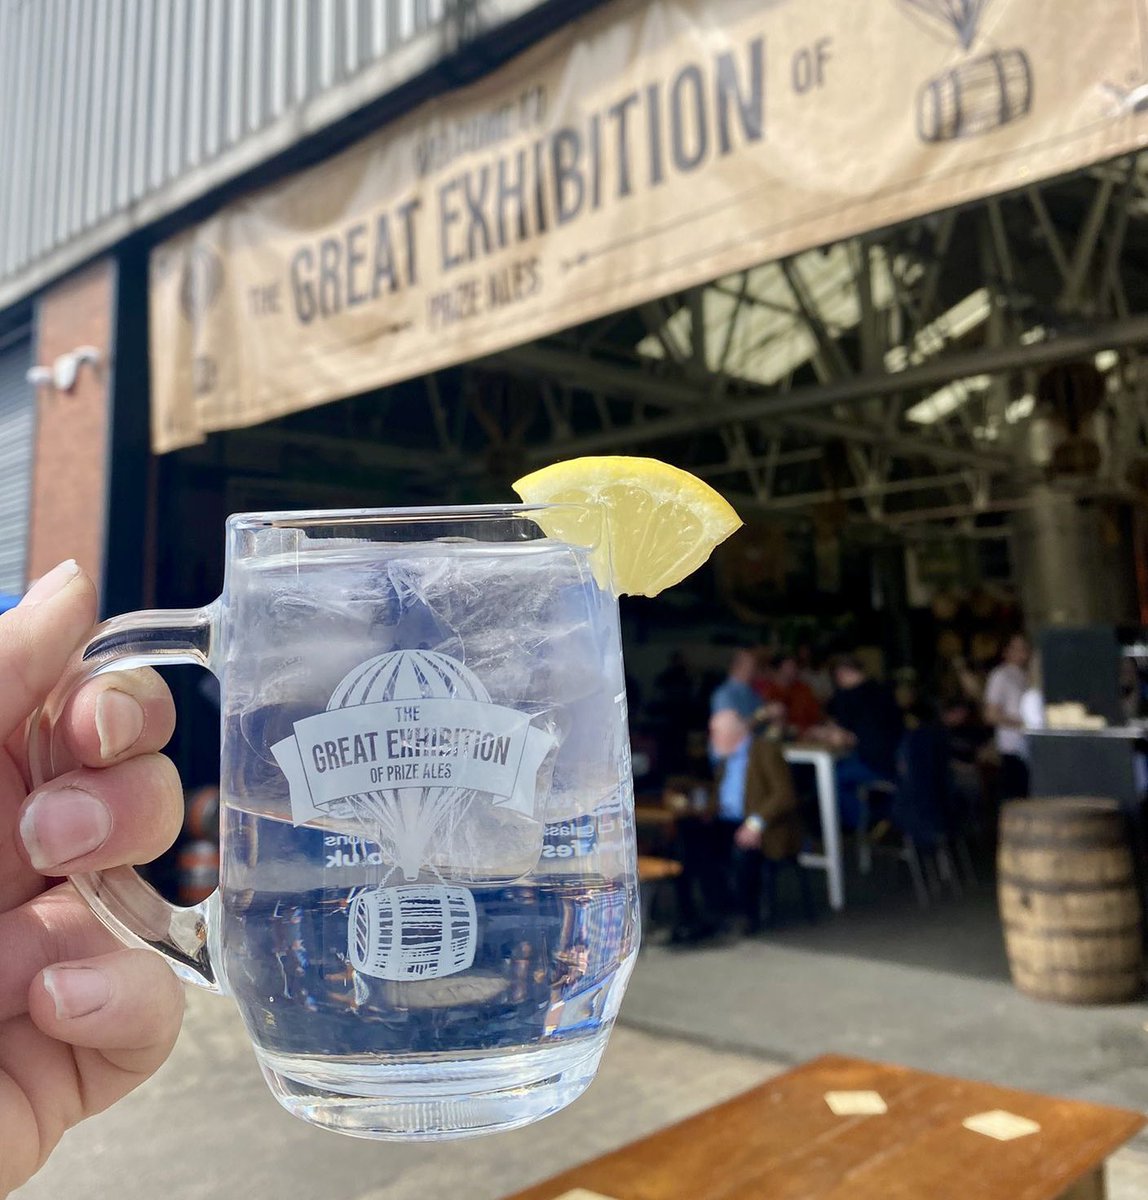 Warm sunshine = ice cold York G&Ts. At the Great Exhibition of Prize Ales at Kirkstall Brewery. 😎🍺🍸😎 #GX2024 @kirkstallbrew